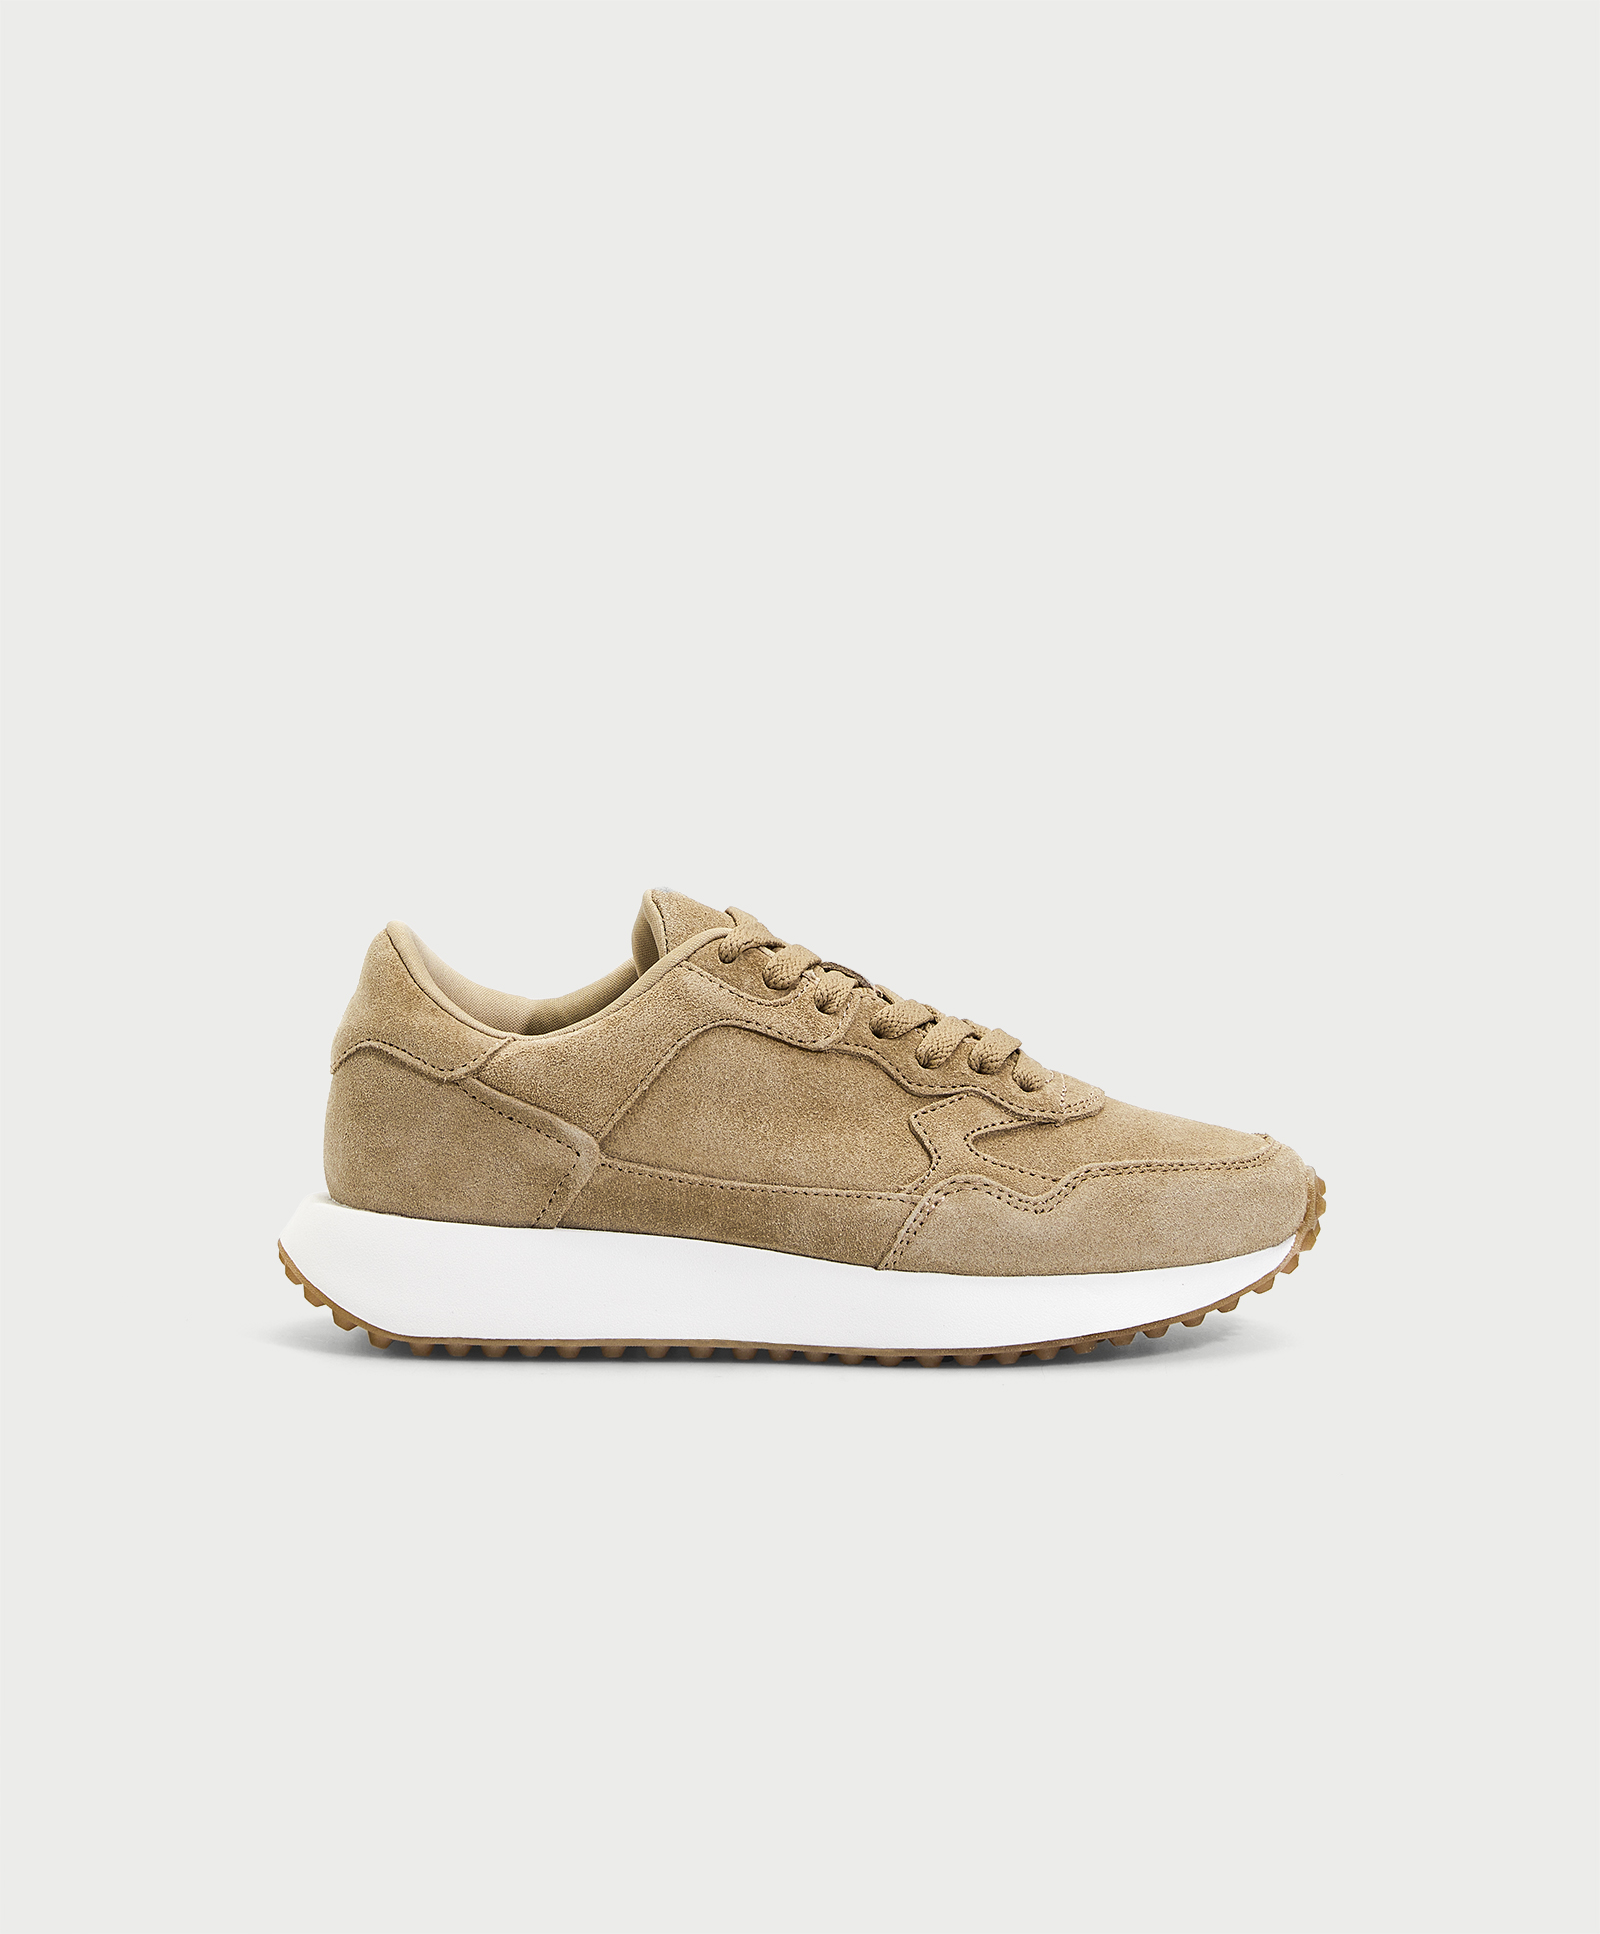 Camel split-leather trainers